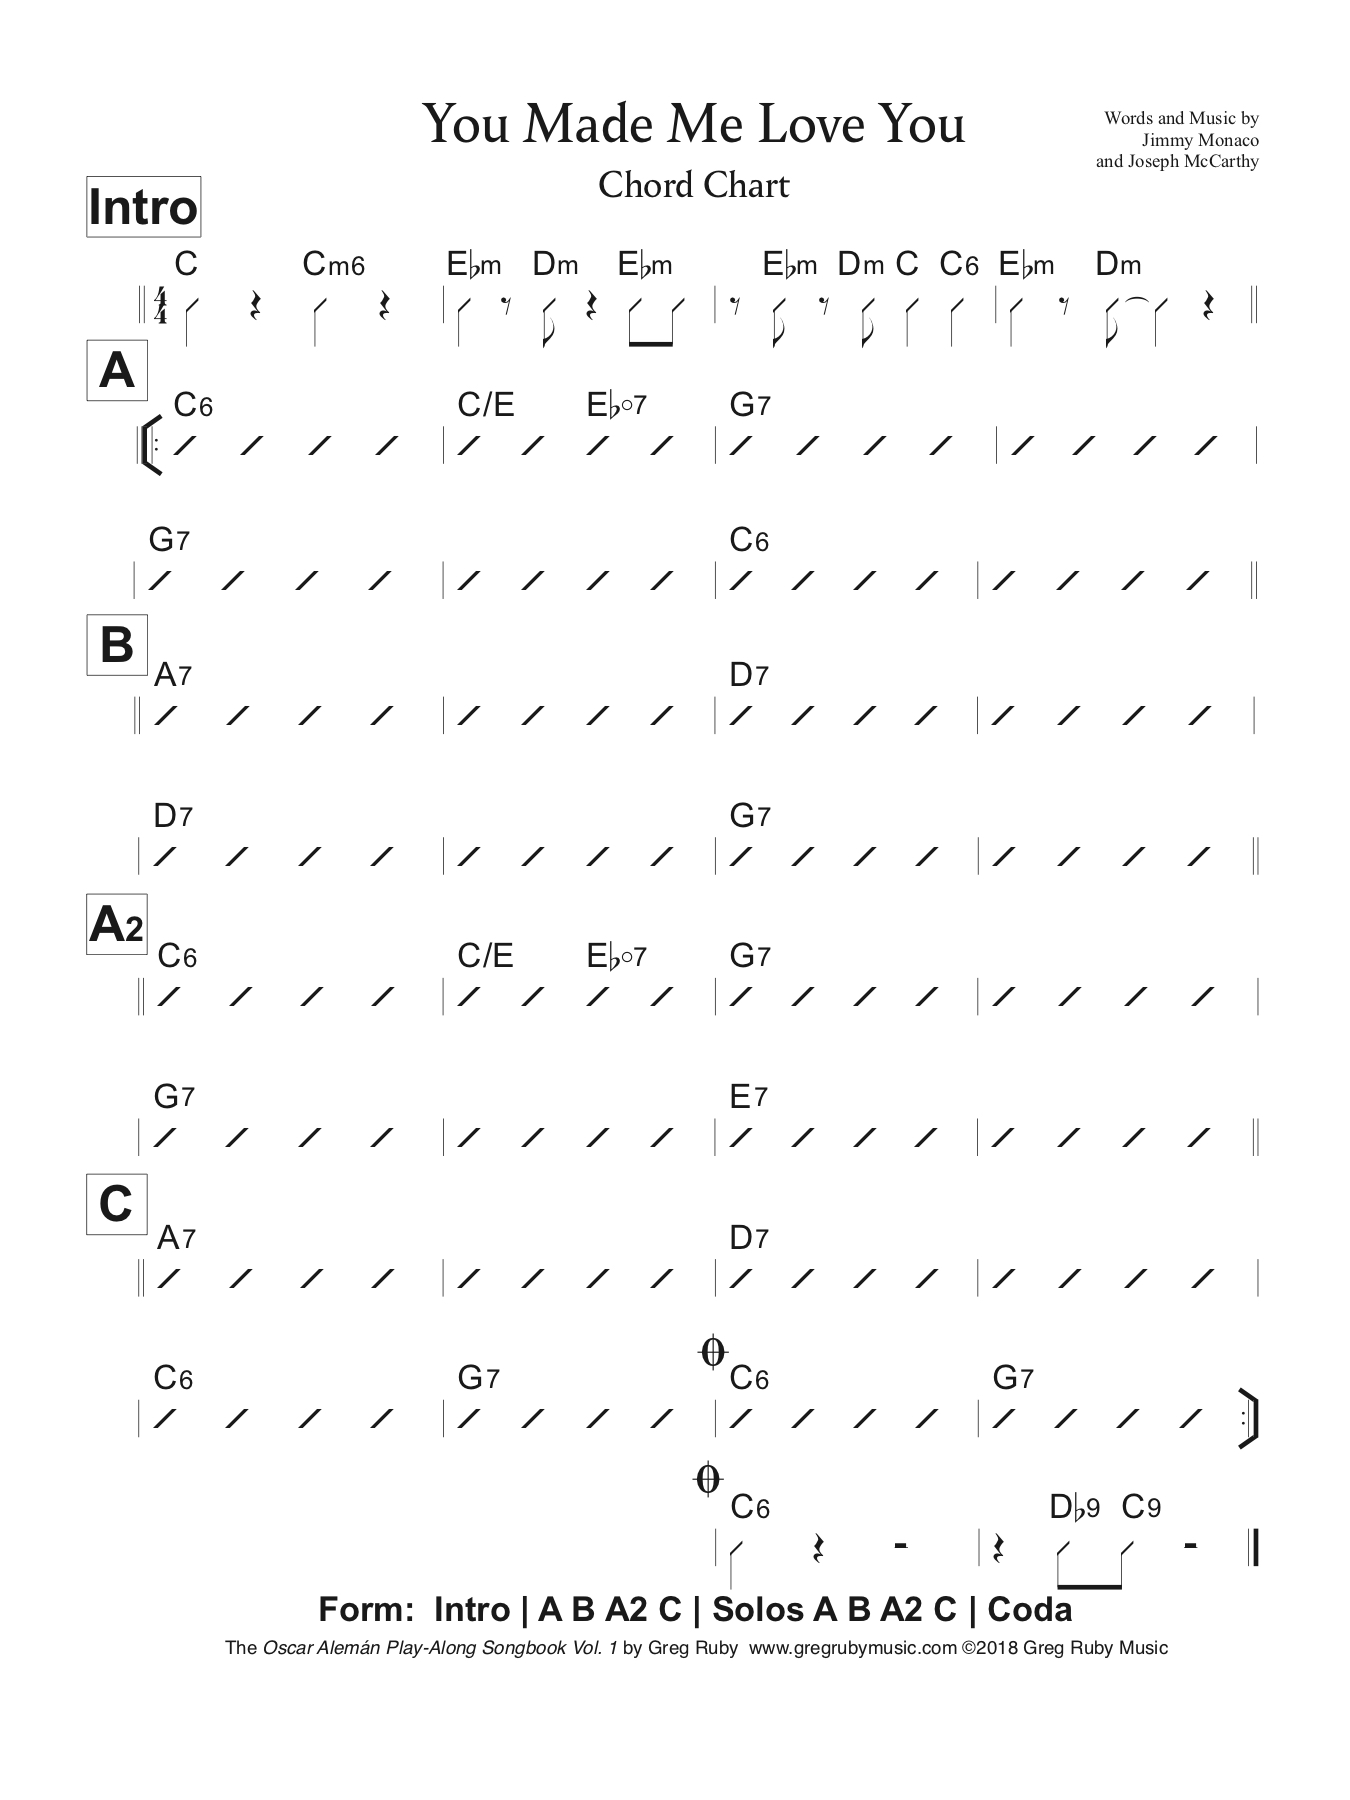 Music Sample from the Chord Chart Companion